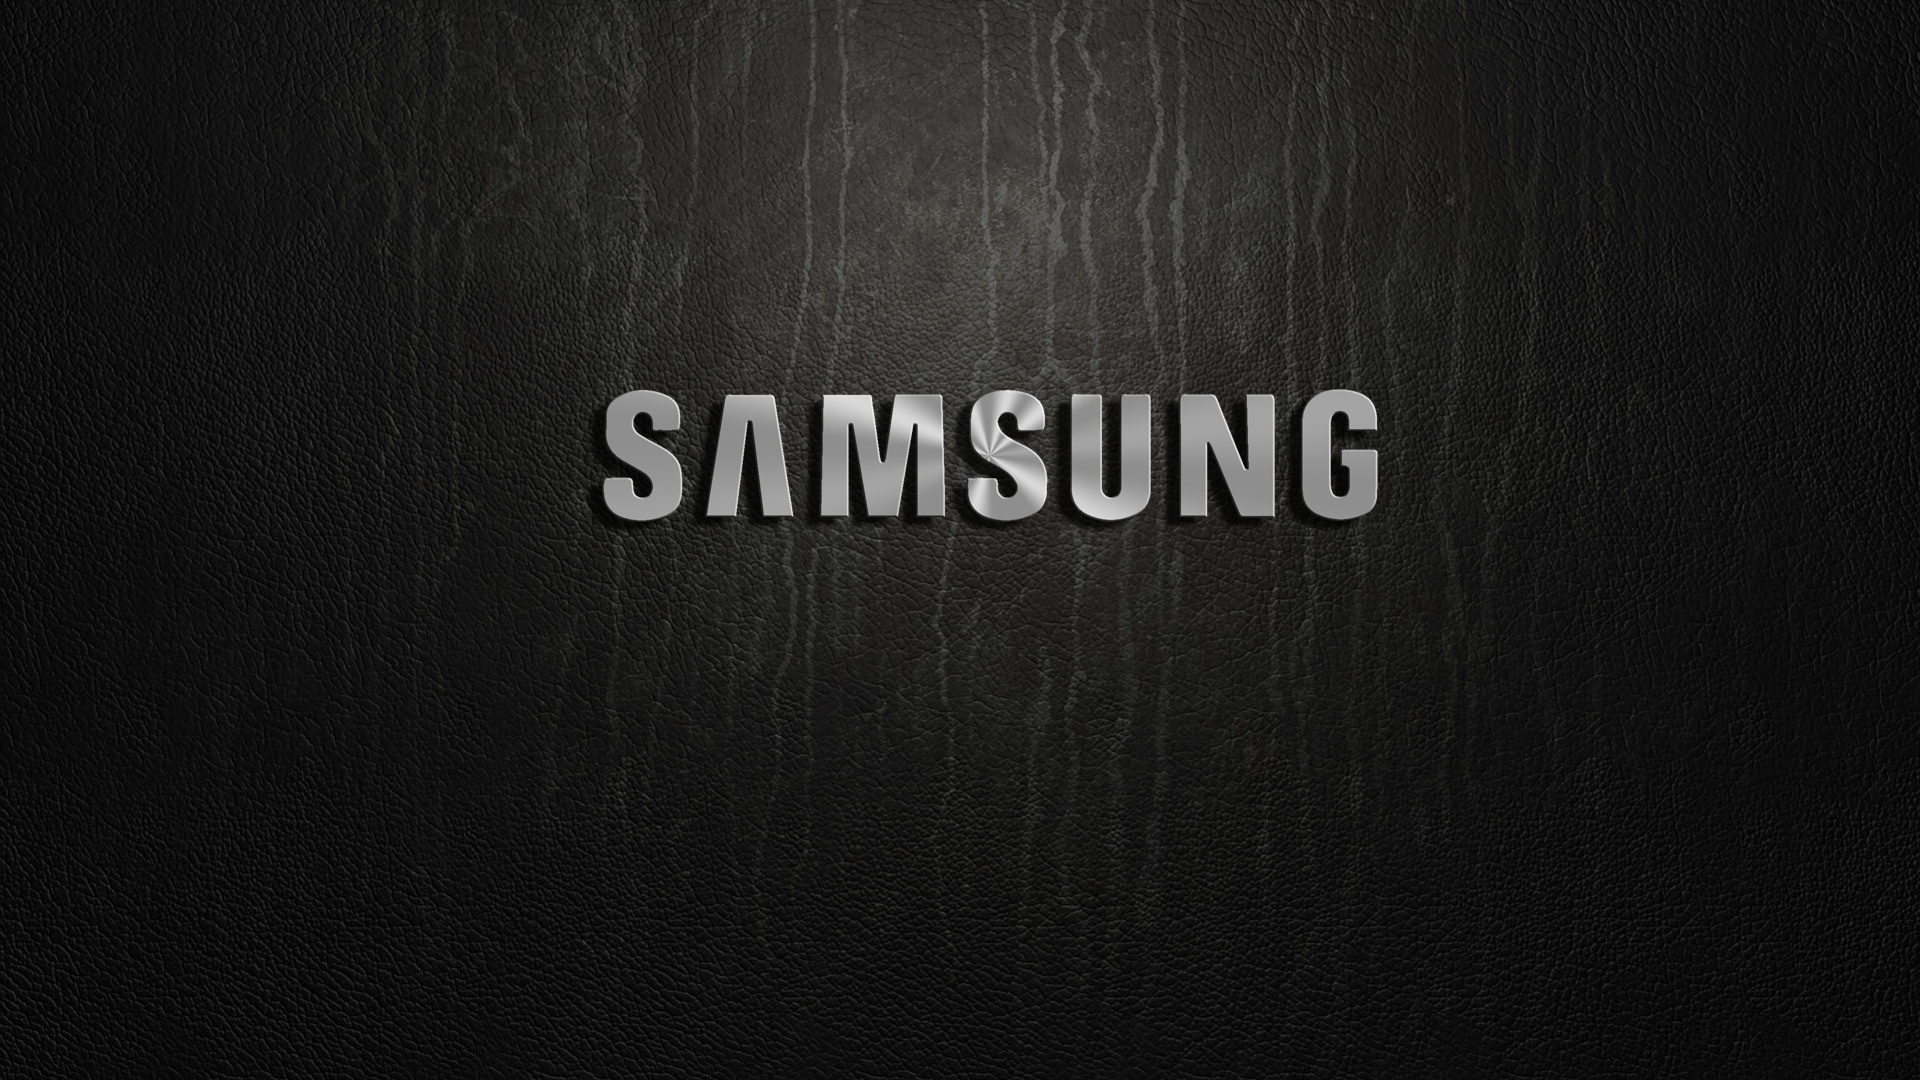 Samsung: The company specializing in the production of a wide variety of consumer and industry electronics. 1920x1080 Full HD Wallpaper.